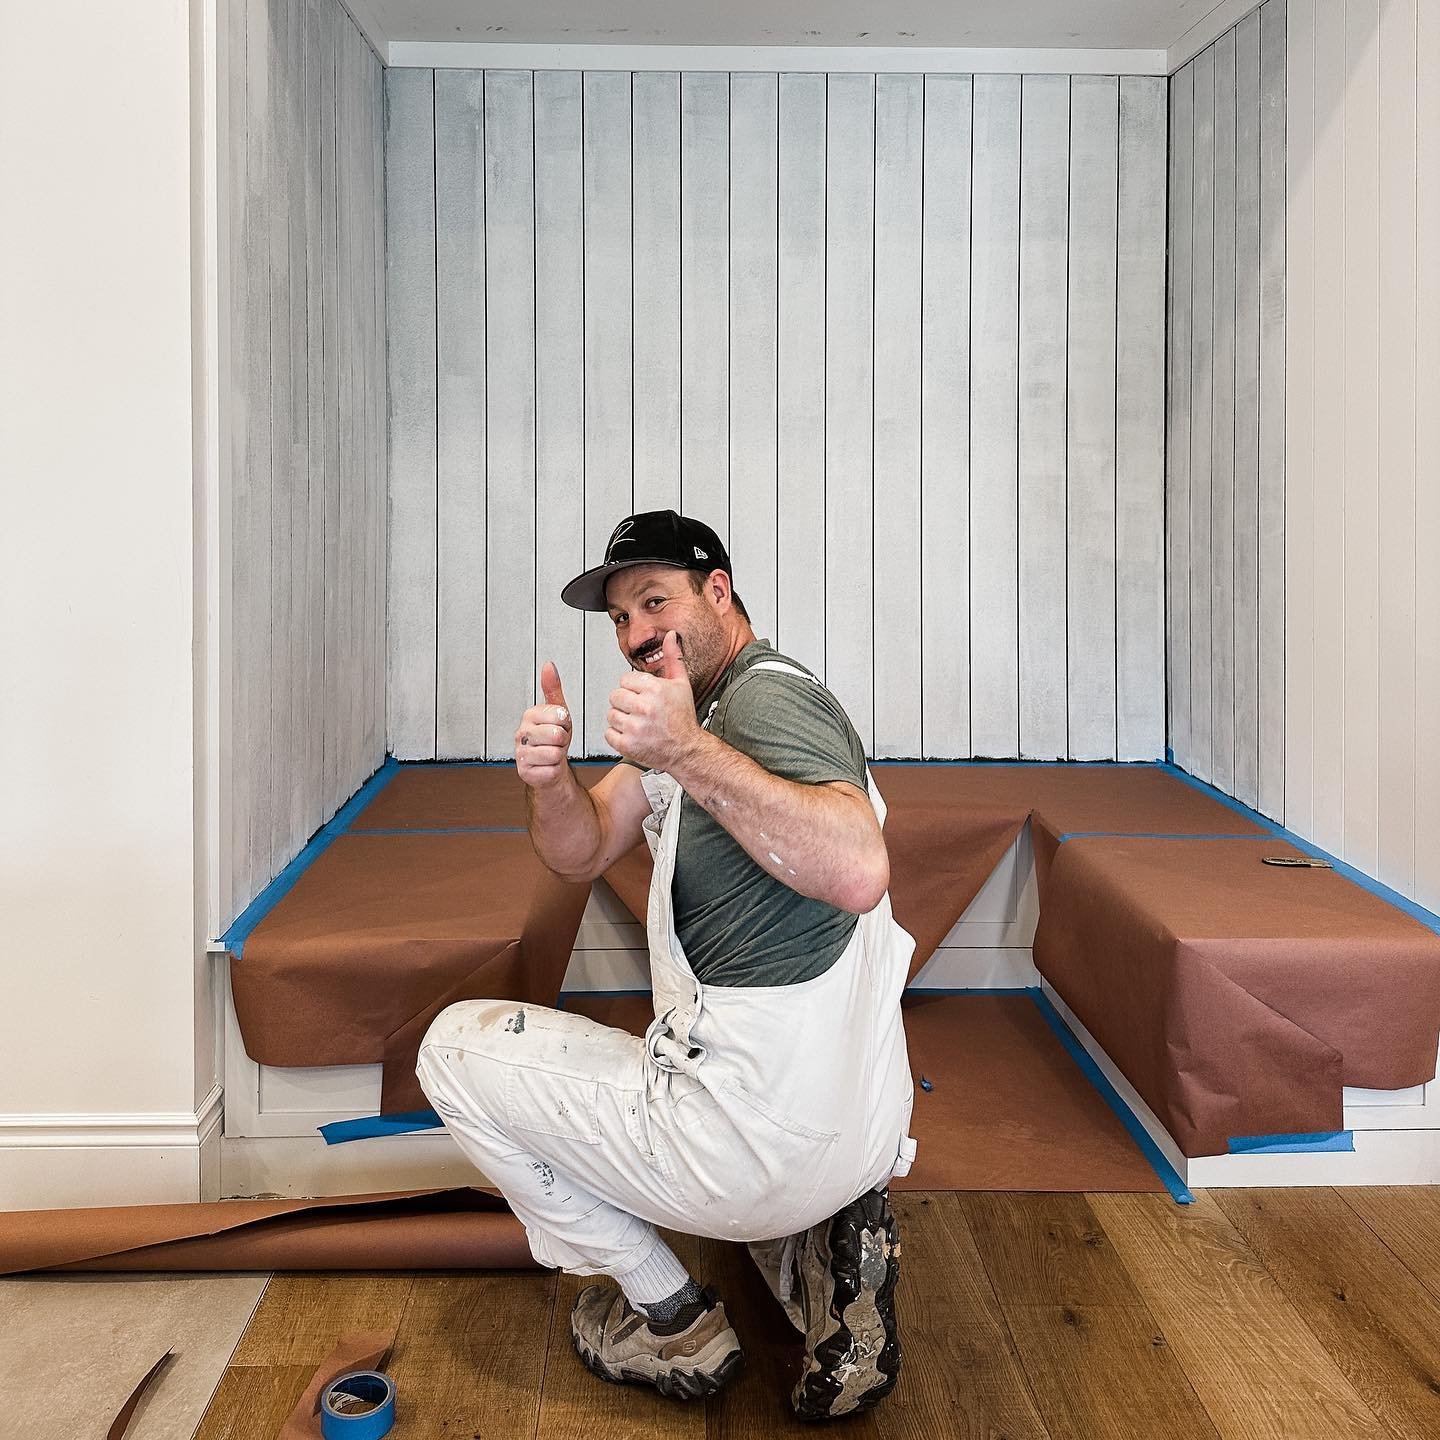 Just a modern day Luigi tackling your paint project! 👨🏻

We&rsquo;ve been knees deep in Project Deyncourt this year; bringing this house back to life for its new owners. It is always so impactful when the paint goes up. Whether it&rsquo;s a new col